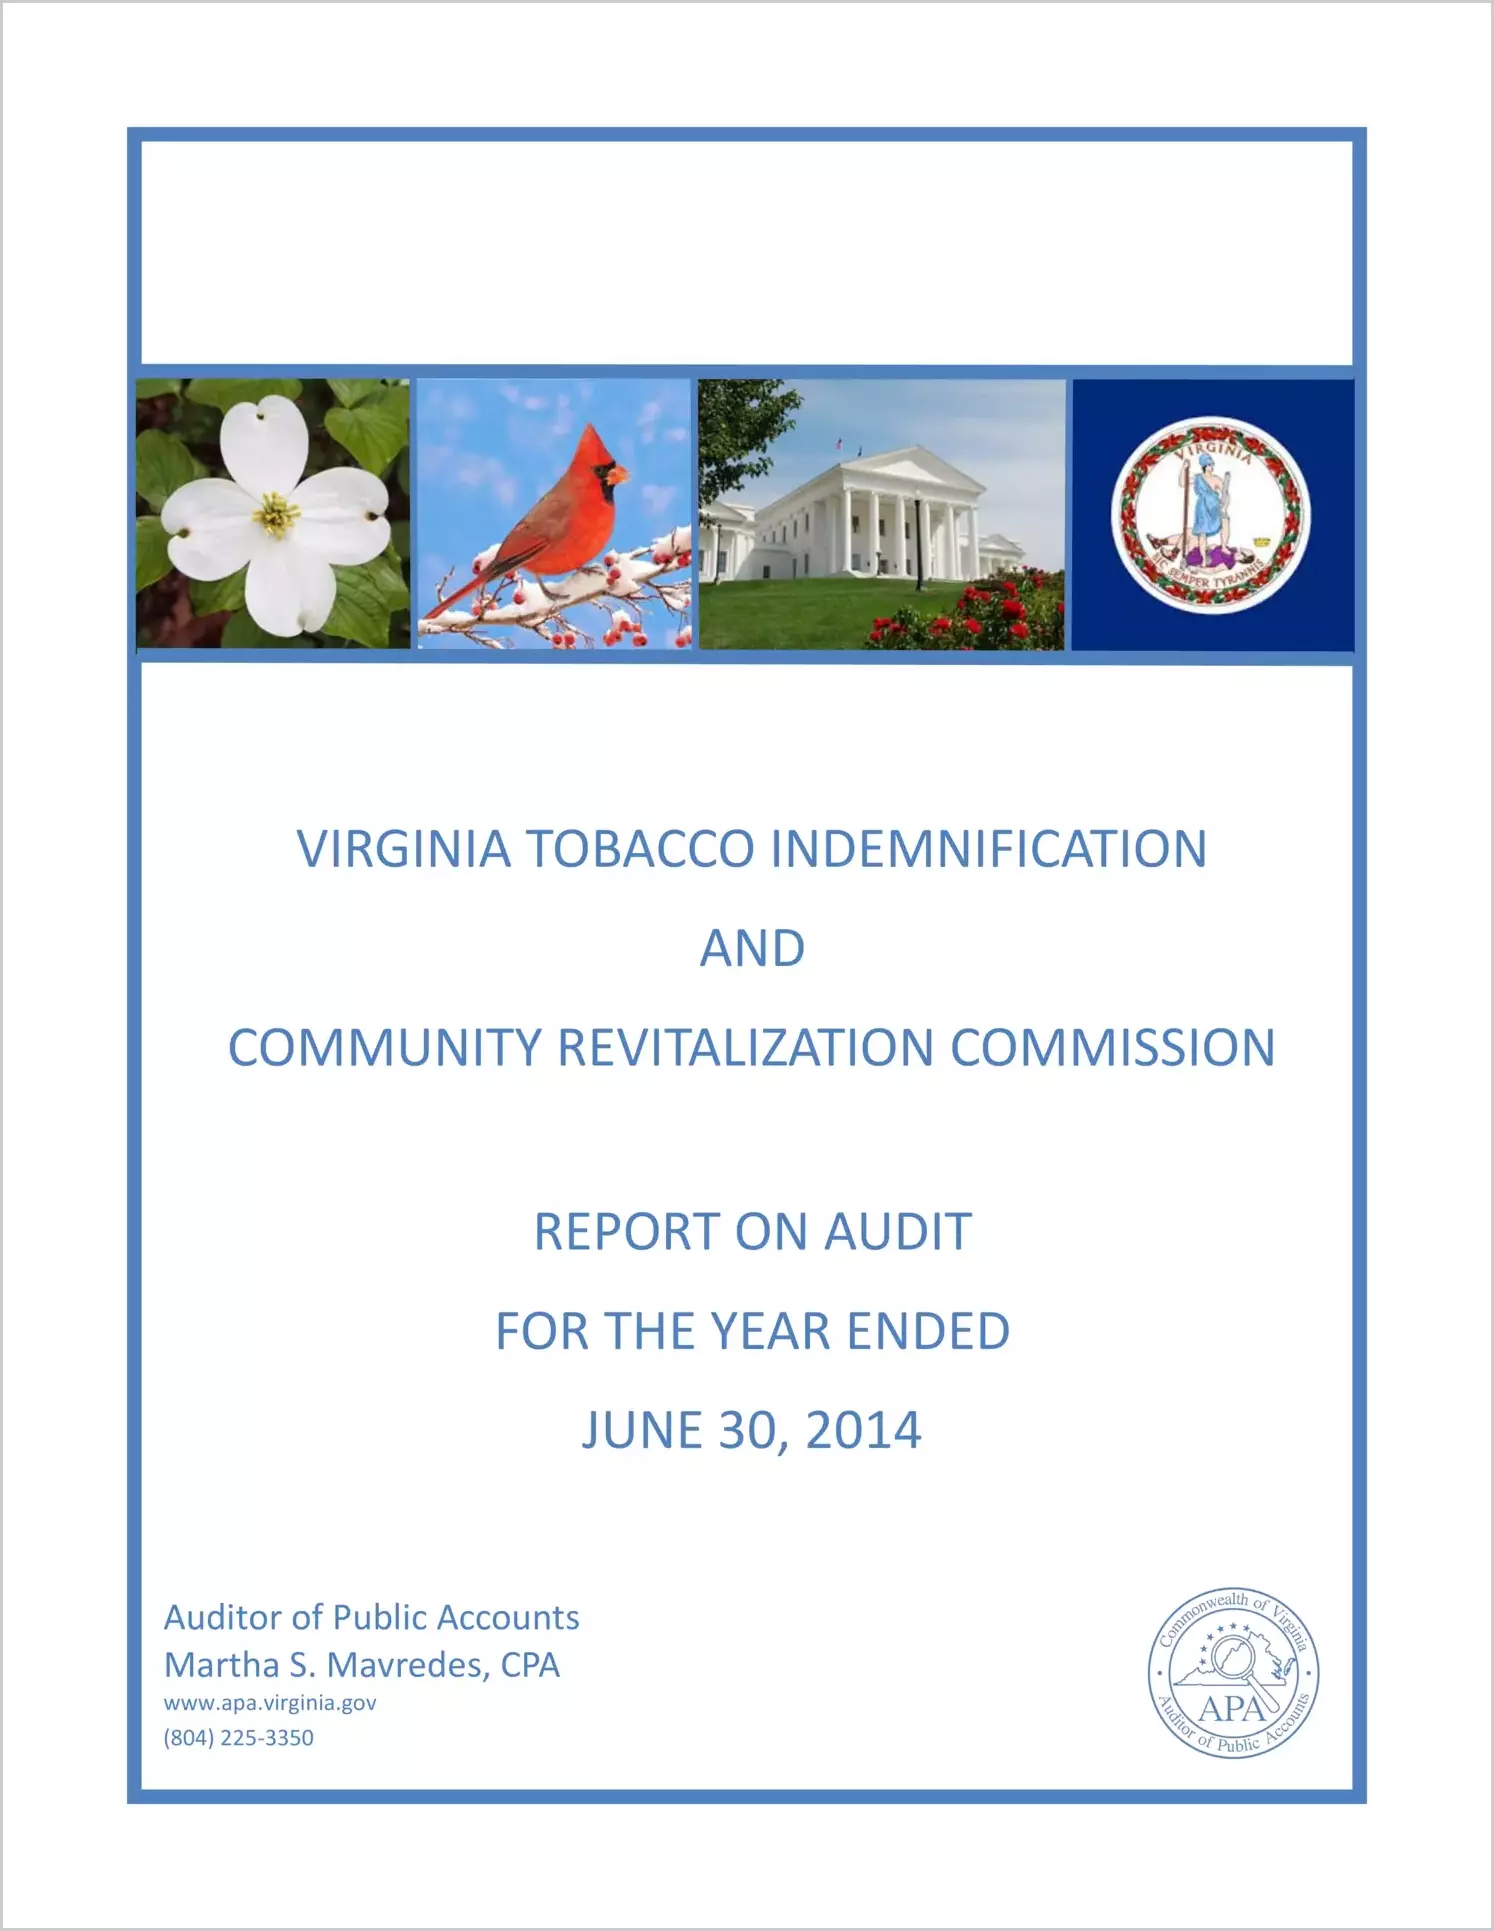 Tobacco Indemnification and Community Revitalization Commission for the year ended June 30, 2014